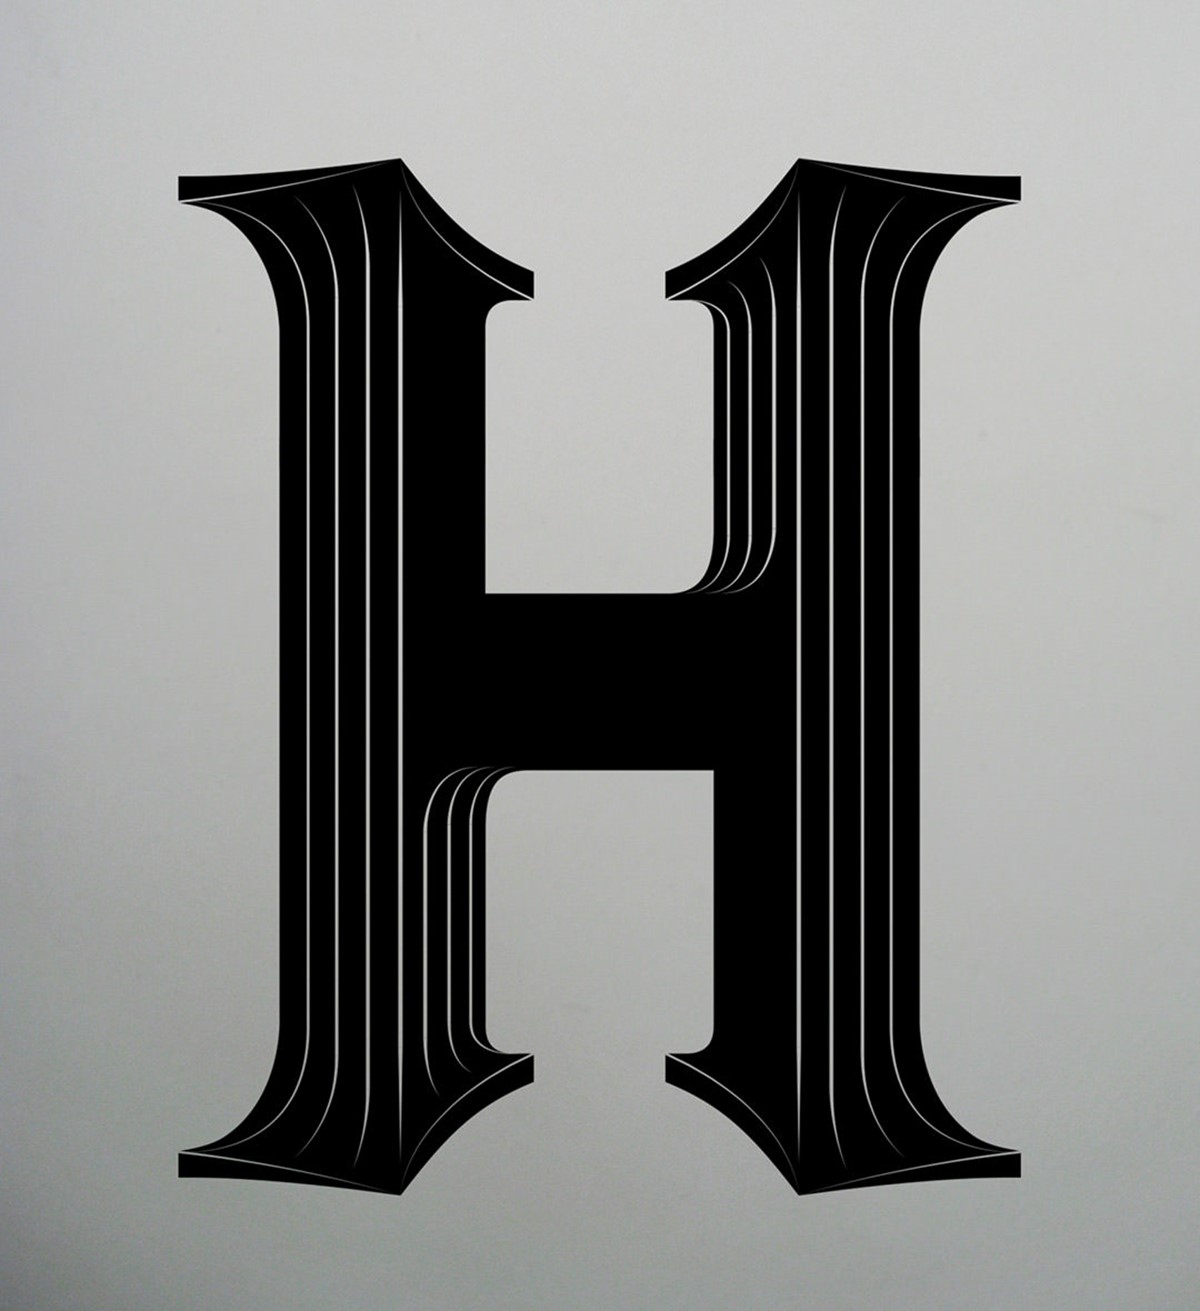 AIGA. Type Tuesday. BLT LTR Series. Typographic experiment: letter H. Design by Superfried.